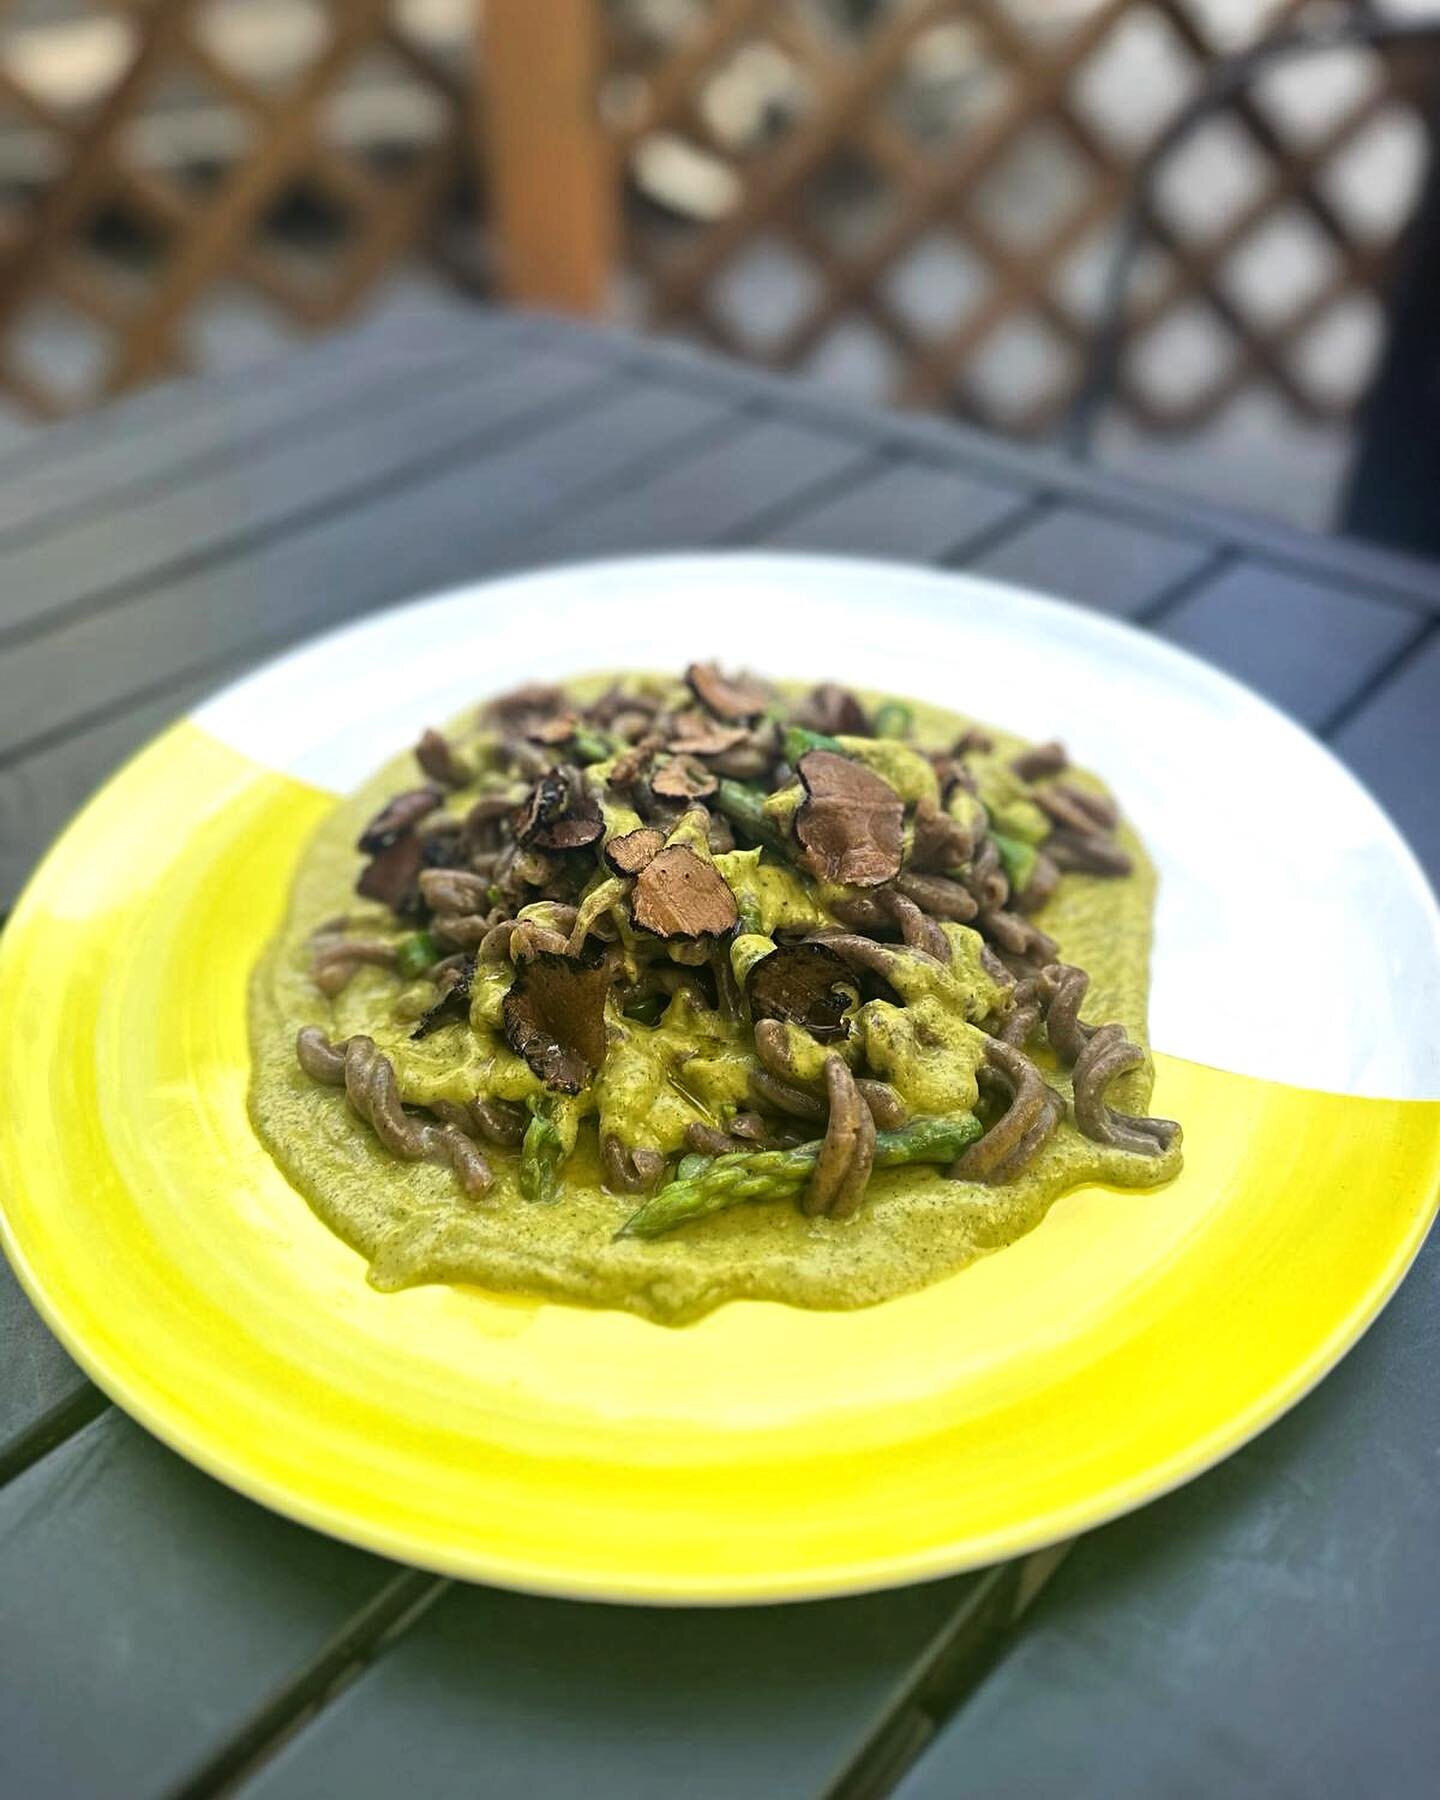 A touch of spring coming at Monzu with our special Casarecce di Grano Arso, a typical fresh pasta from Southern Italy - Apulia! - that we are serving with a delicious asparagus cream and truffle 💚